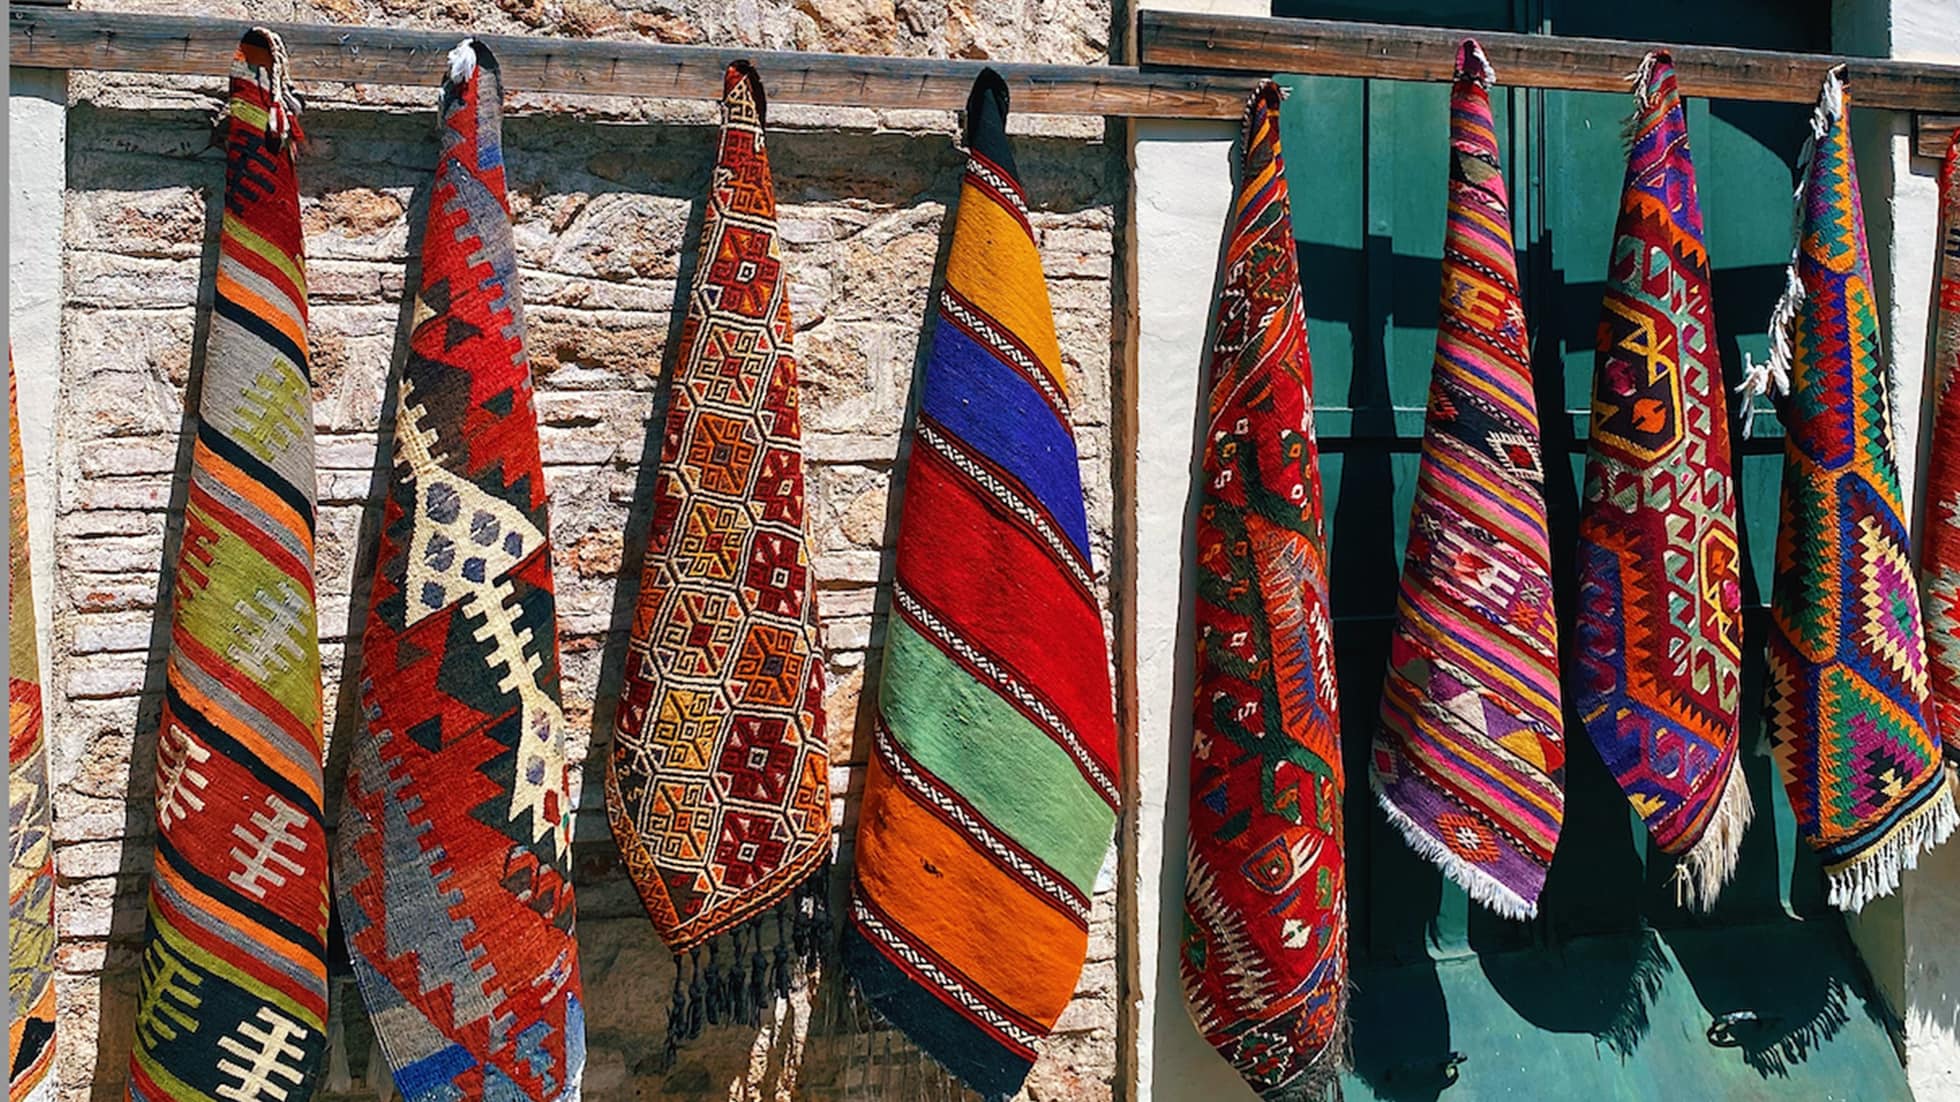 Authentic Turkish rugs hanging on the wall